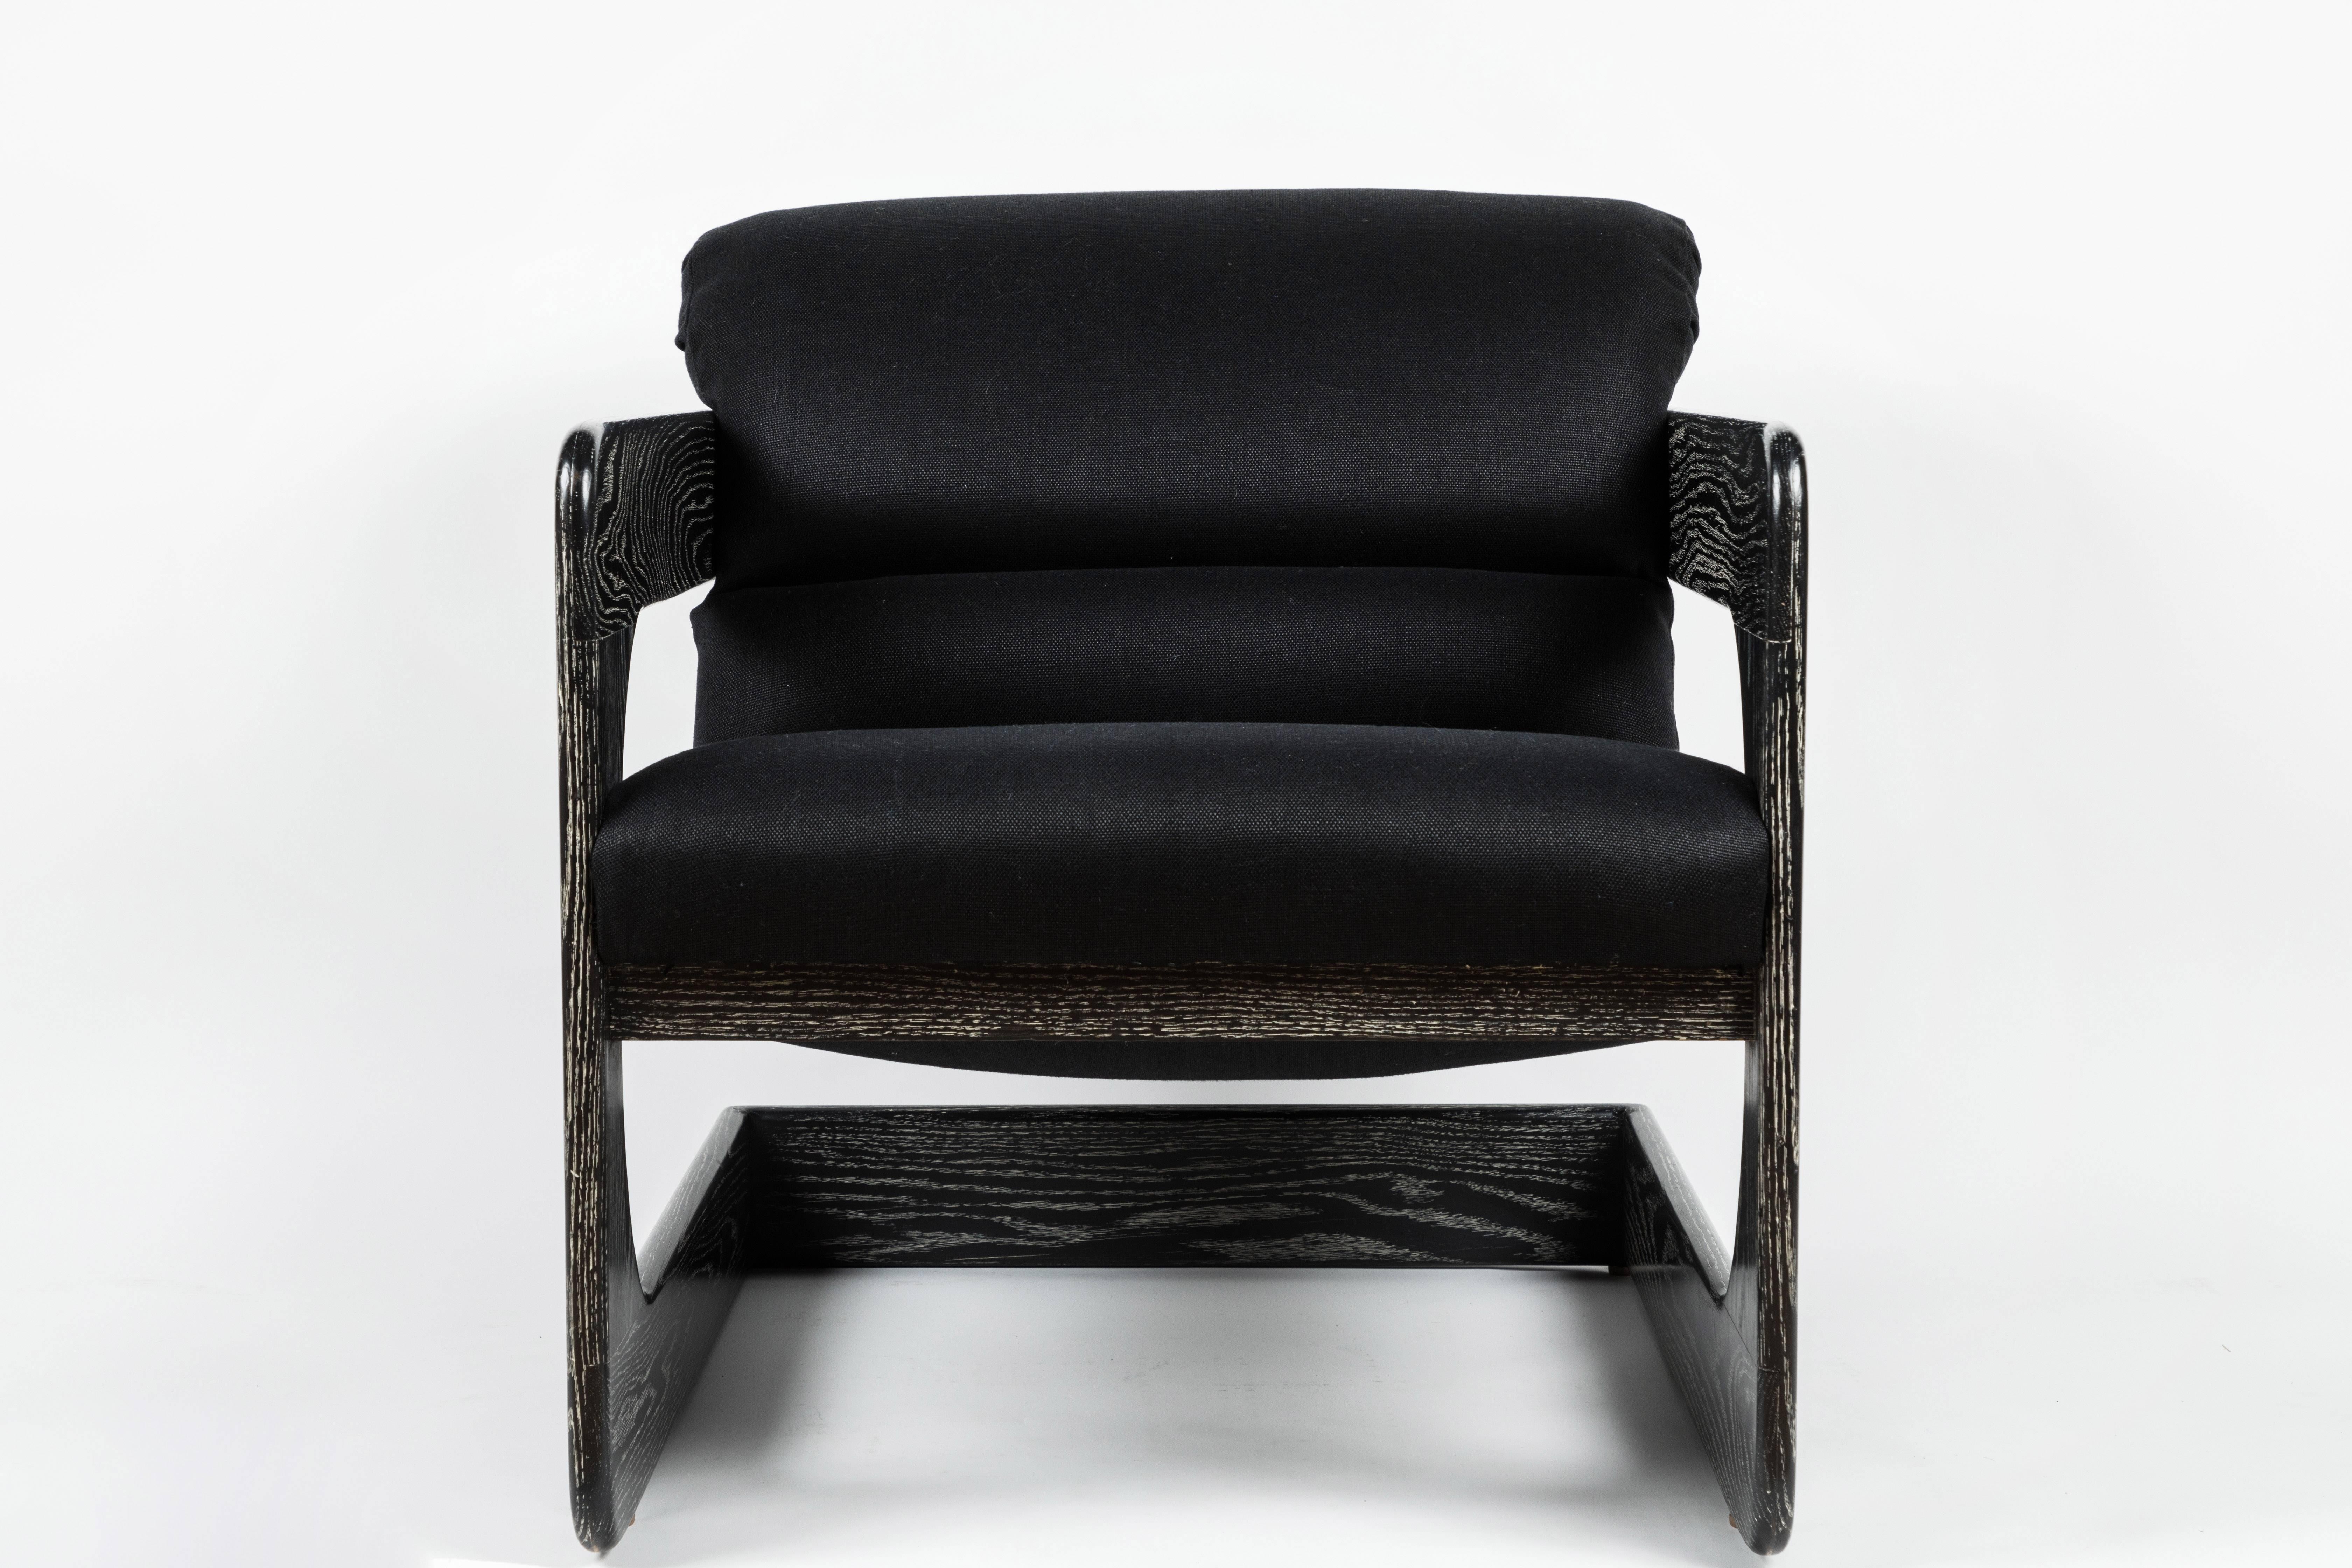 Rare lounge chair designed by Lou Hodges for California Design Group in the 1970s. Cantilever design oak frame features trademark rounded edges. Restored in striking black ceruse finish and newly reupholstered in black linen fabric. Iconic piece of